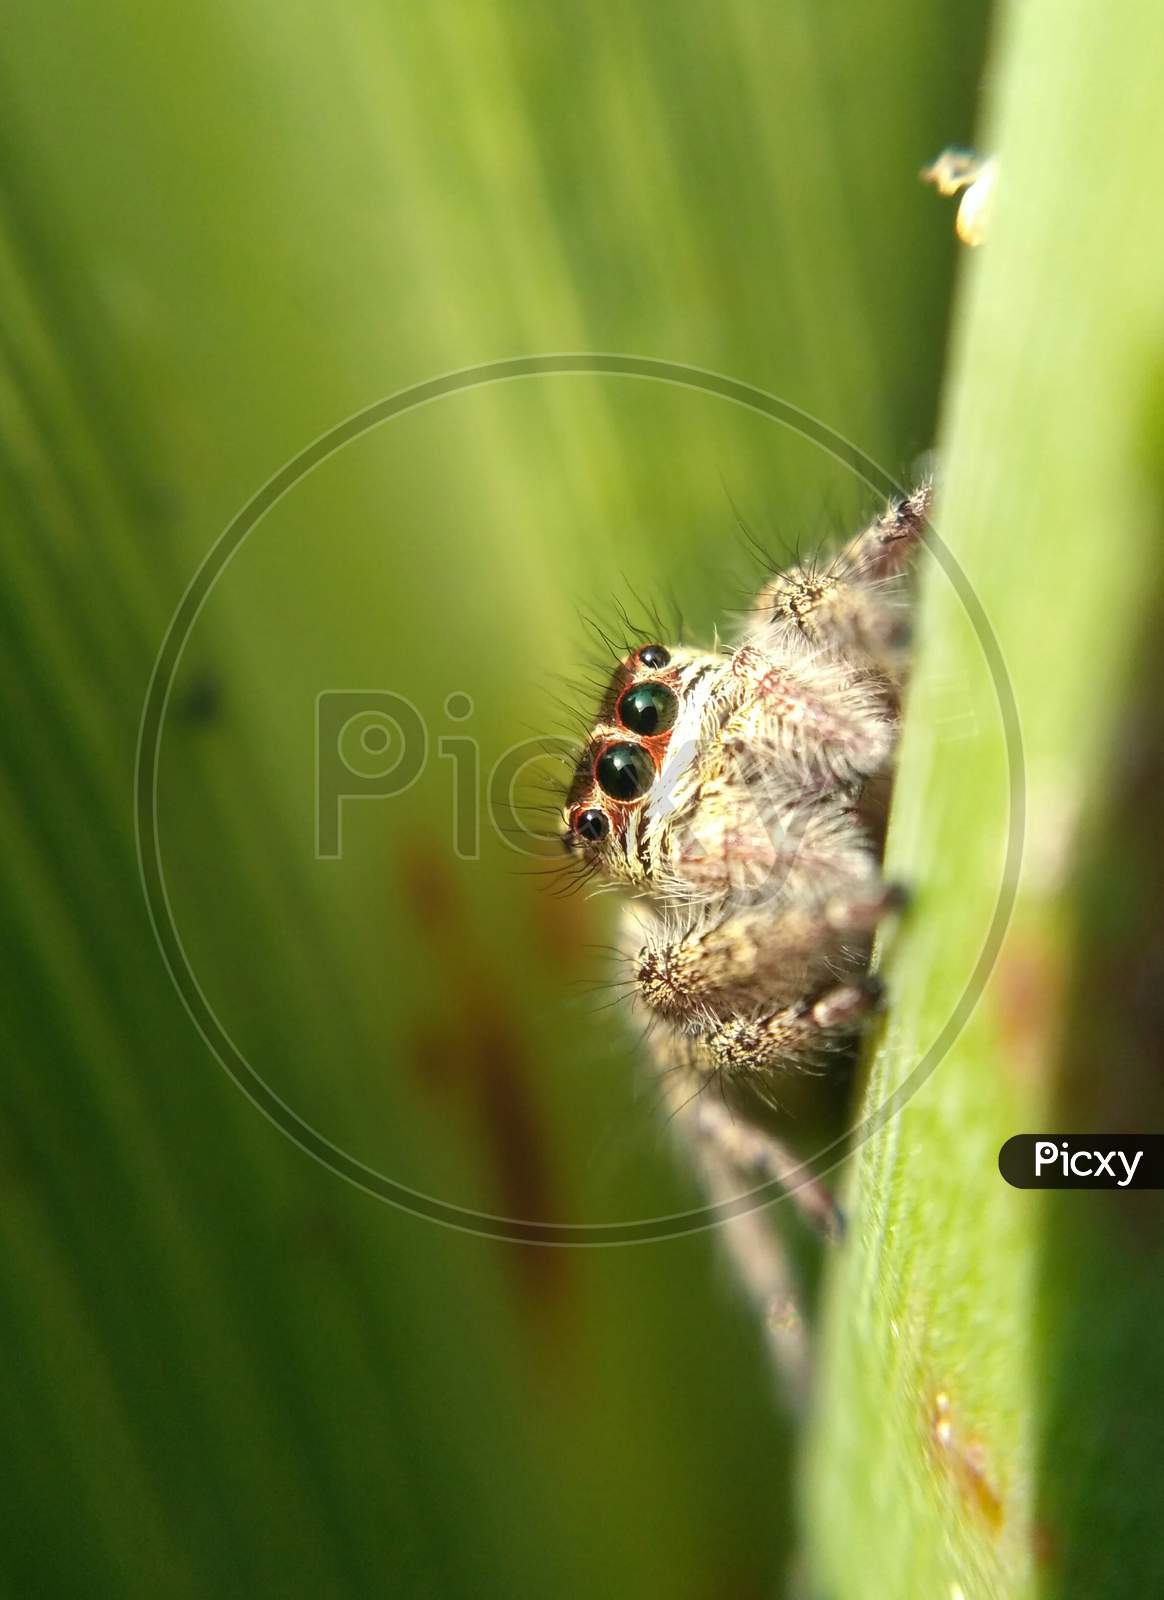 A cute little spider posing to my camera